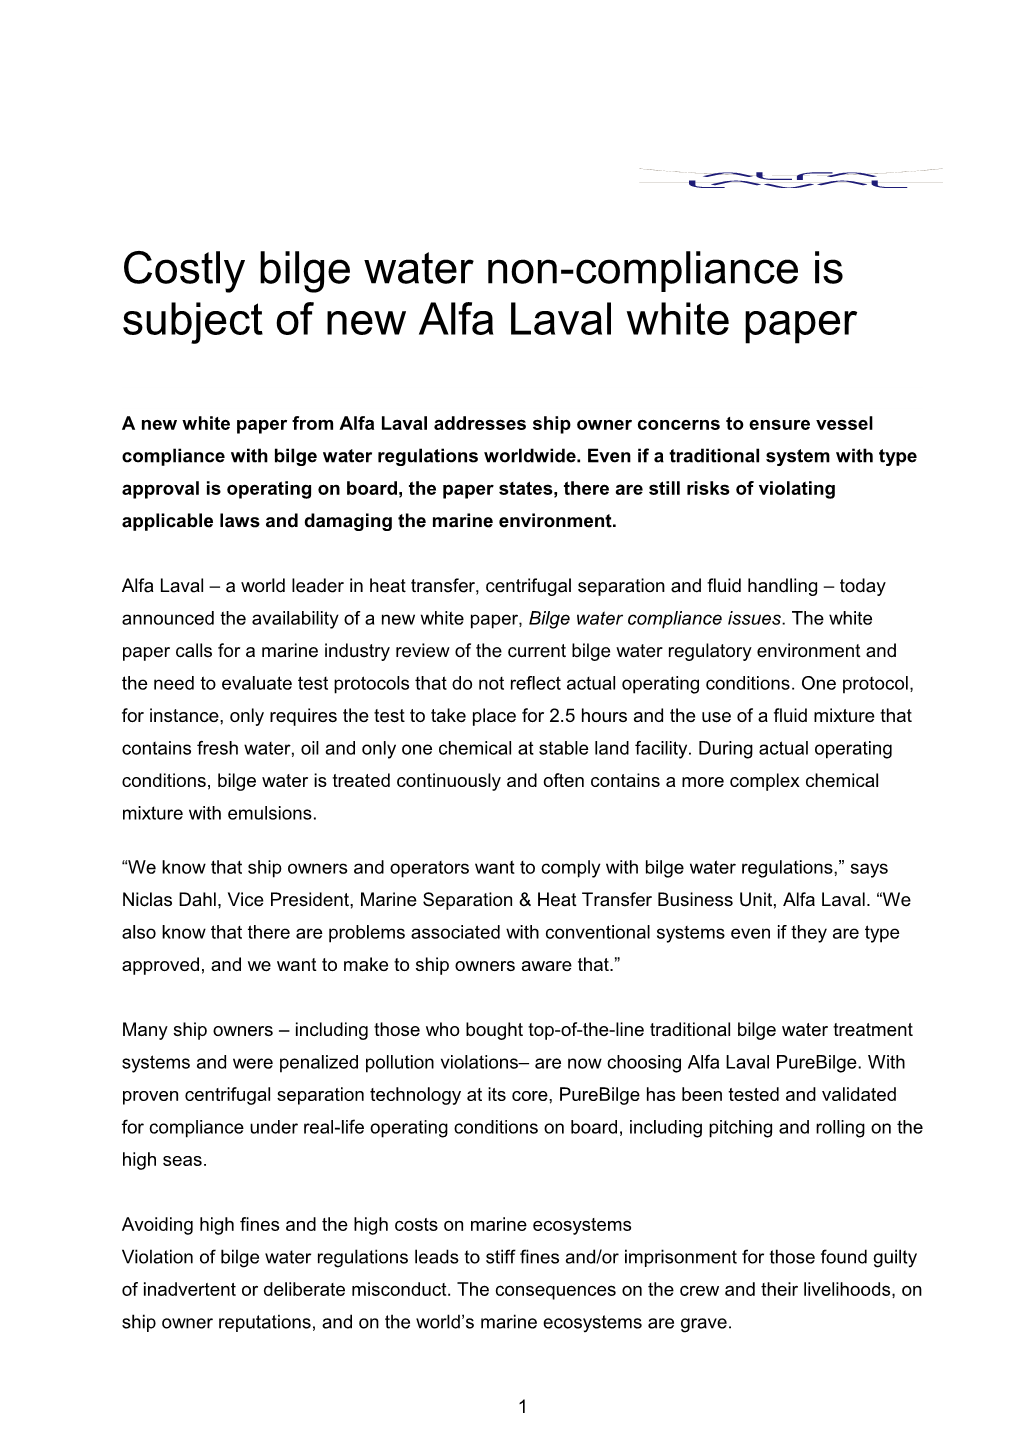 New Alfa Laval White Paper on Costly Bilge Water Non-Compliance